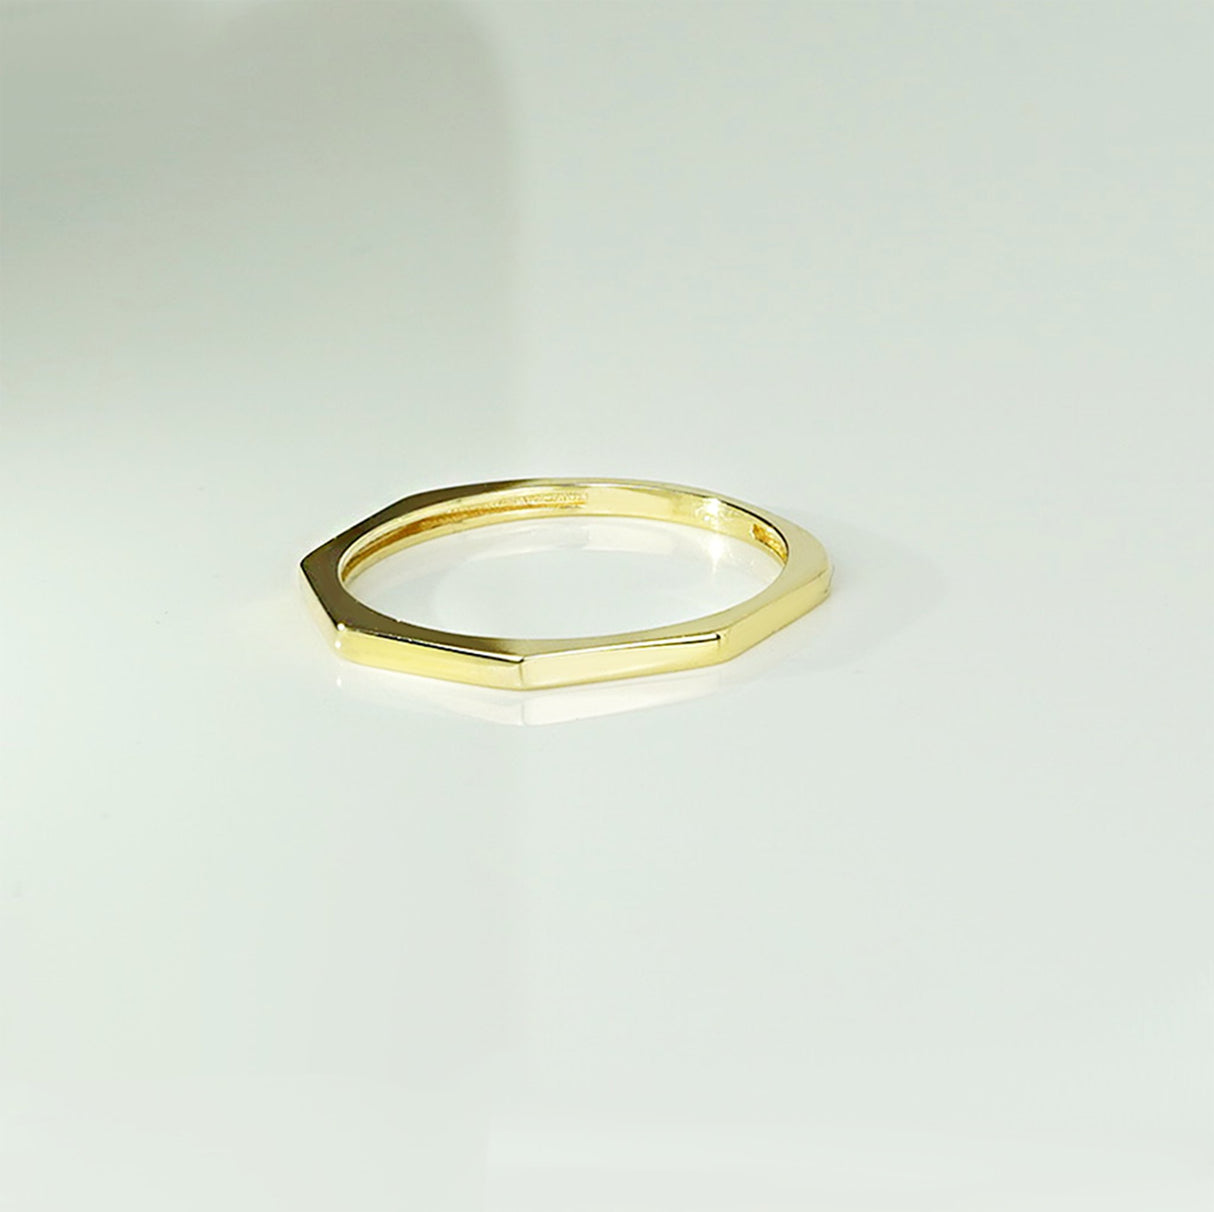 Octagon Gold Ring / 14k Solid Gold Ring / Minimalist Geometric Design Ring  / Bolt Shape Ring / Simple Ring / Wedding Ring, Gifts for Her 